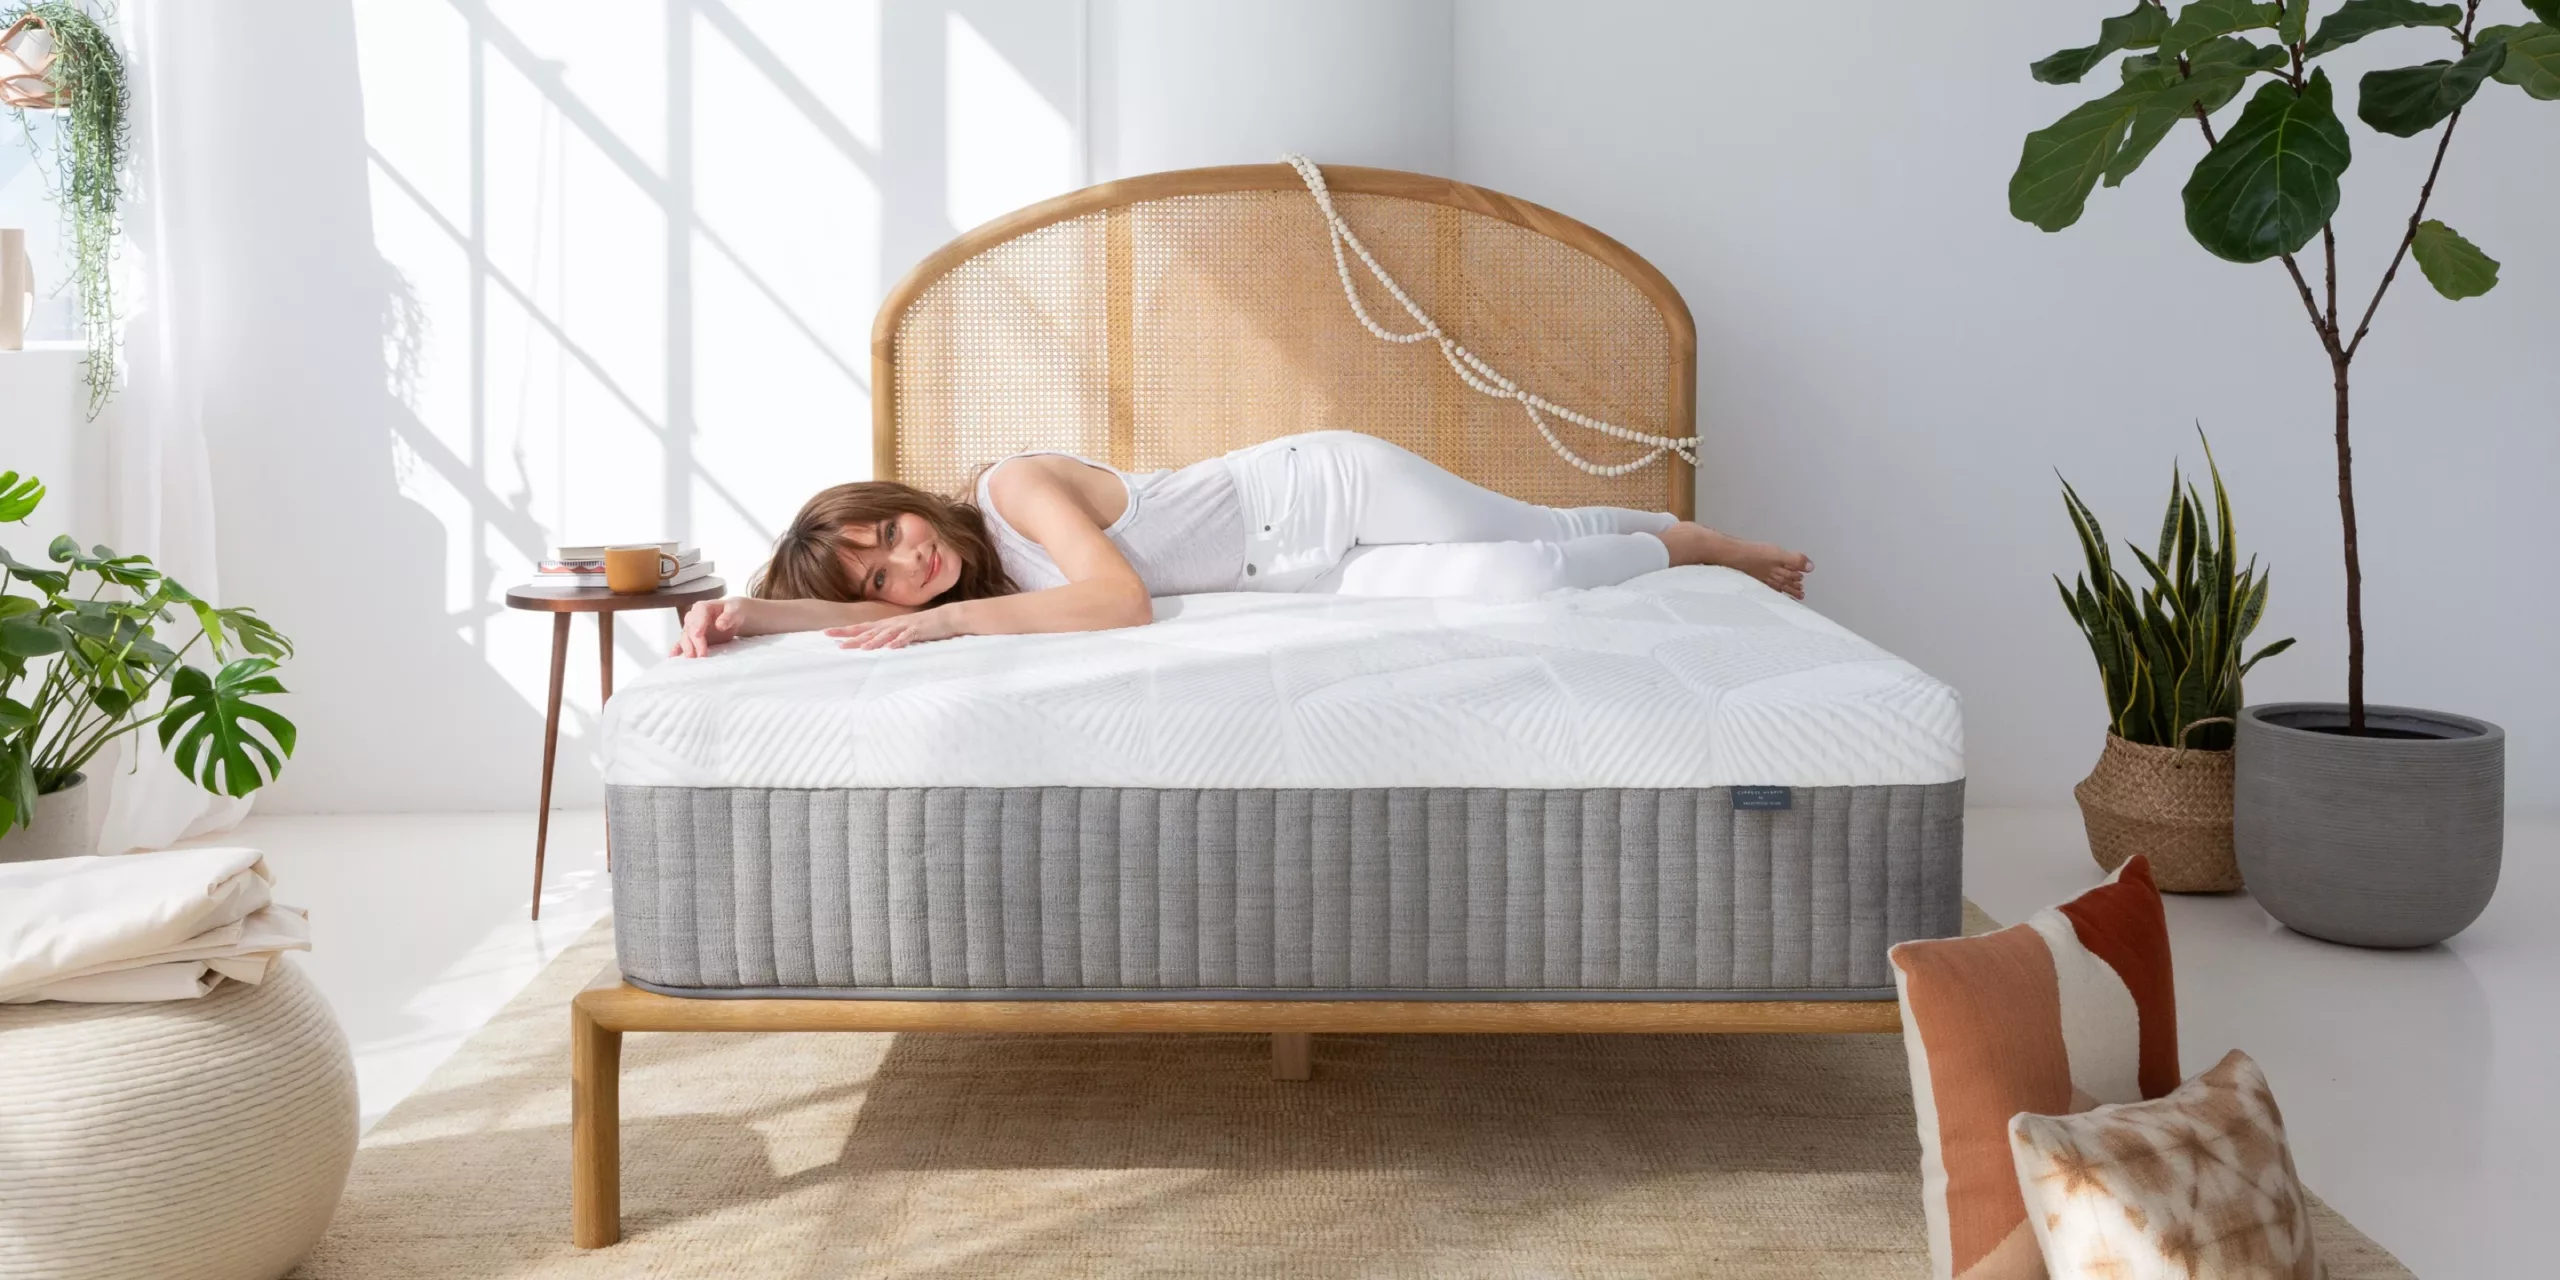 Cypress mattress from Brentwood home in a bedroom setting